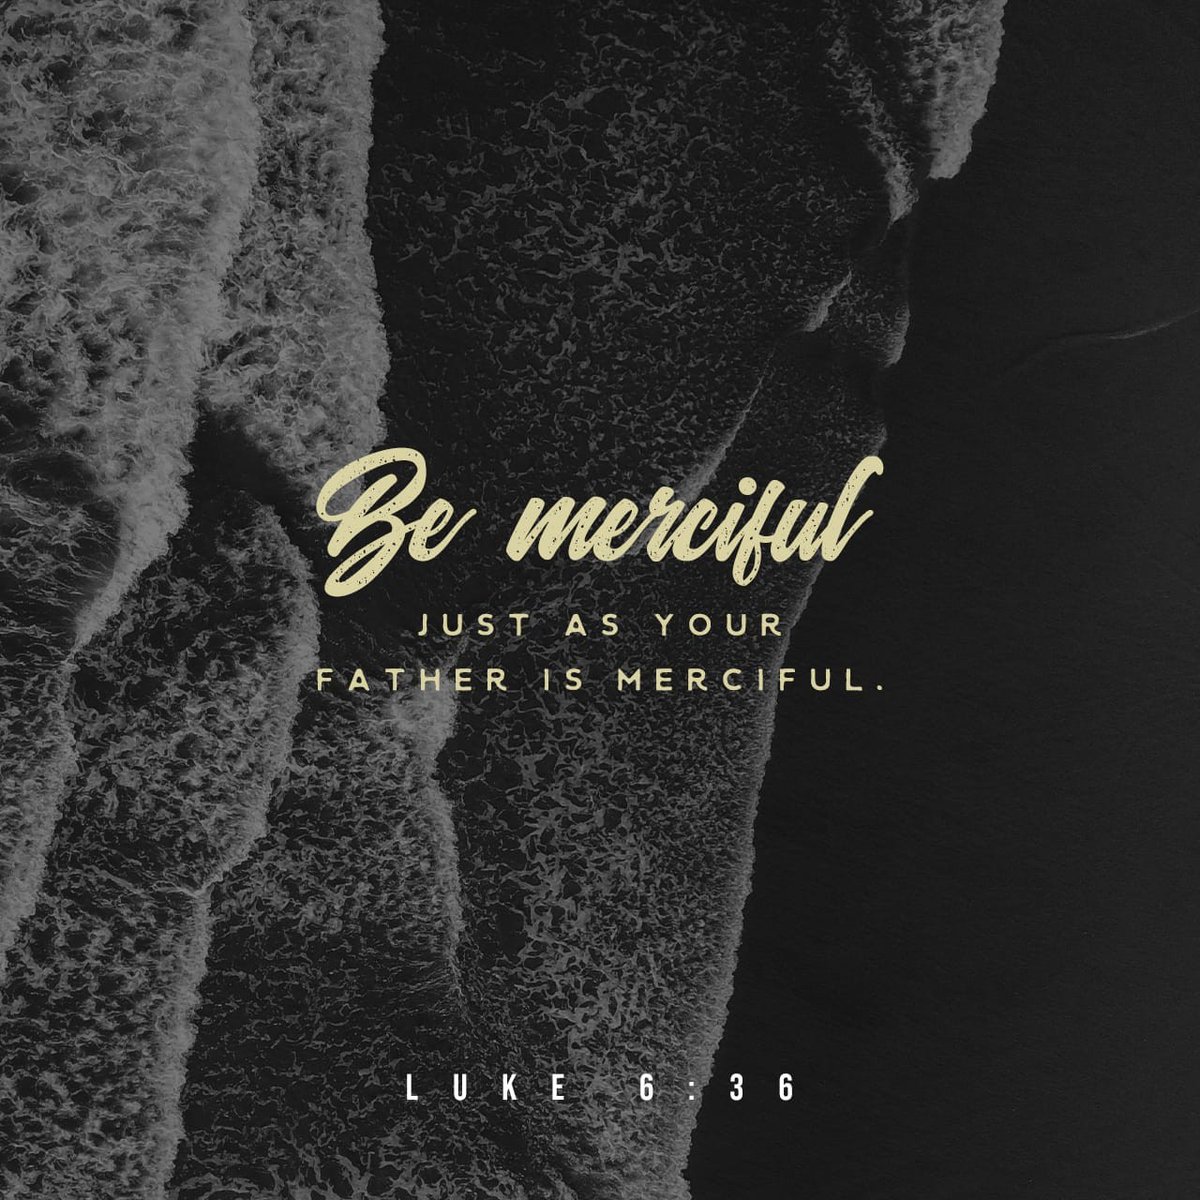 Luke 6:36 KJV [36] Be ye therefore merciful, as your Father also is merciful.